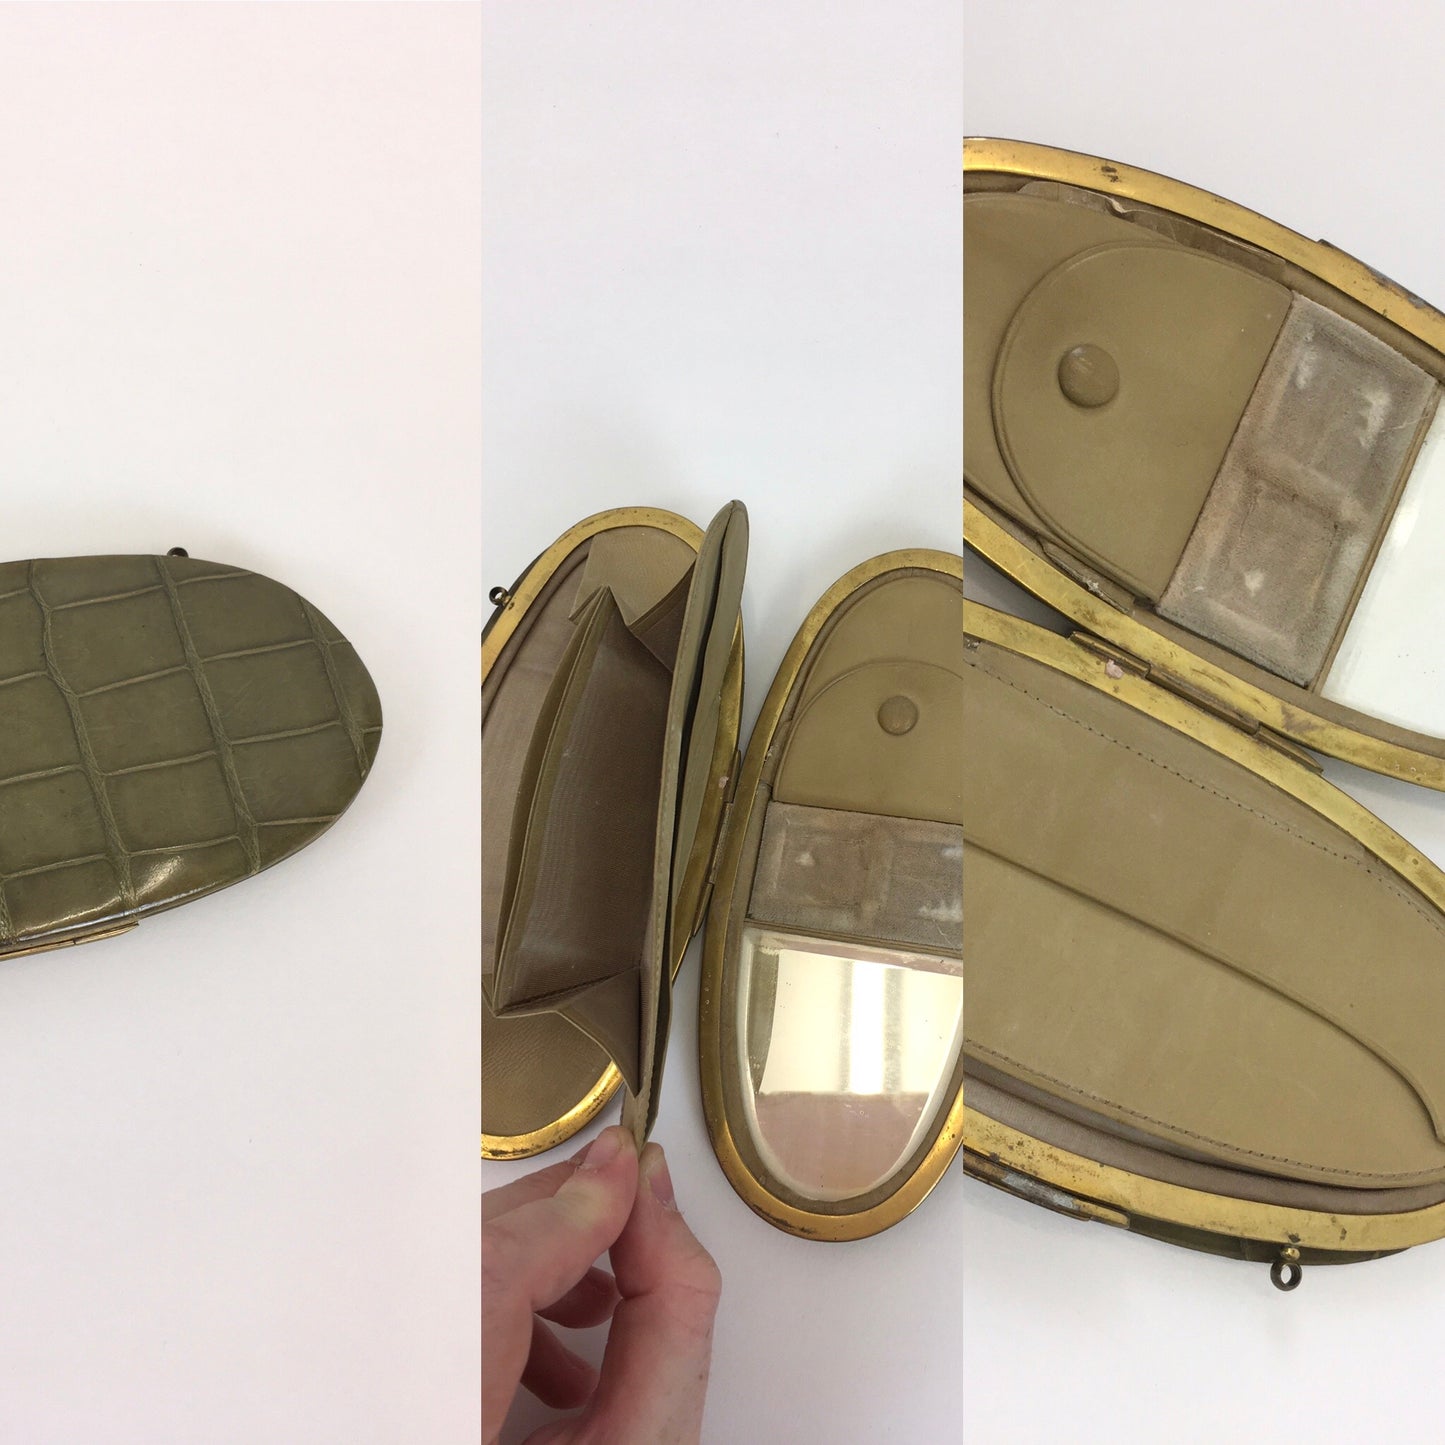 Original 1930s Beautiful Evening Purse / Compendium Bag - In a Soft Olive Green with Fabulous Interior